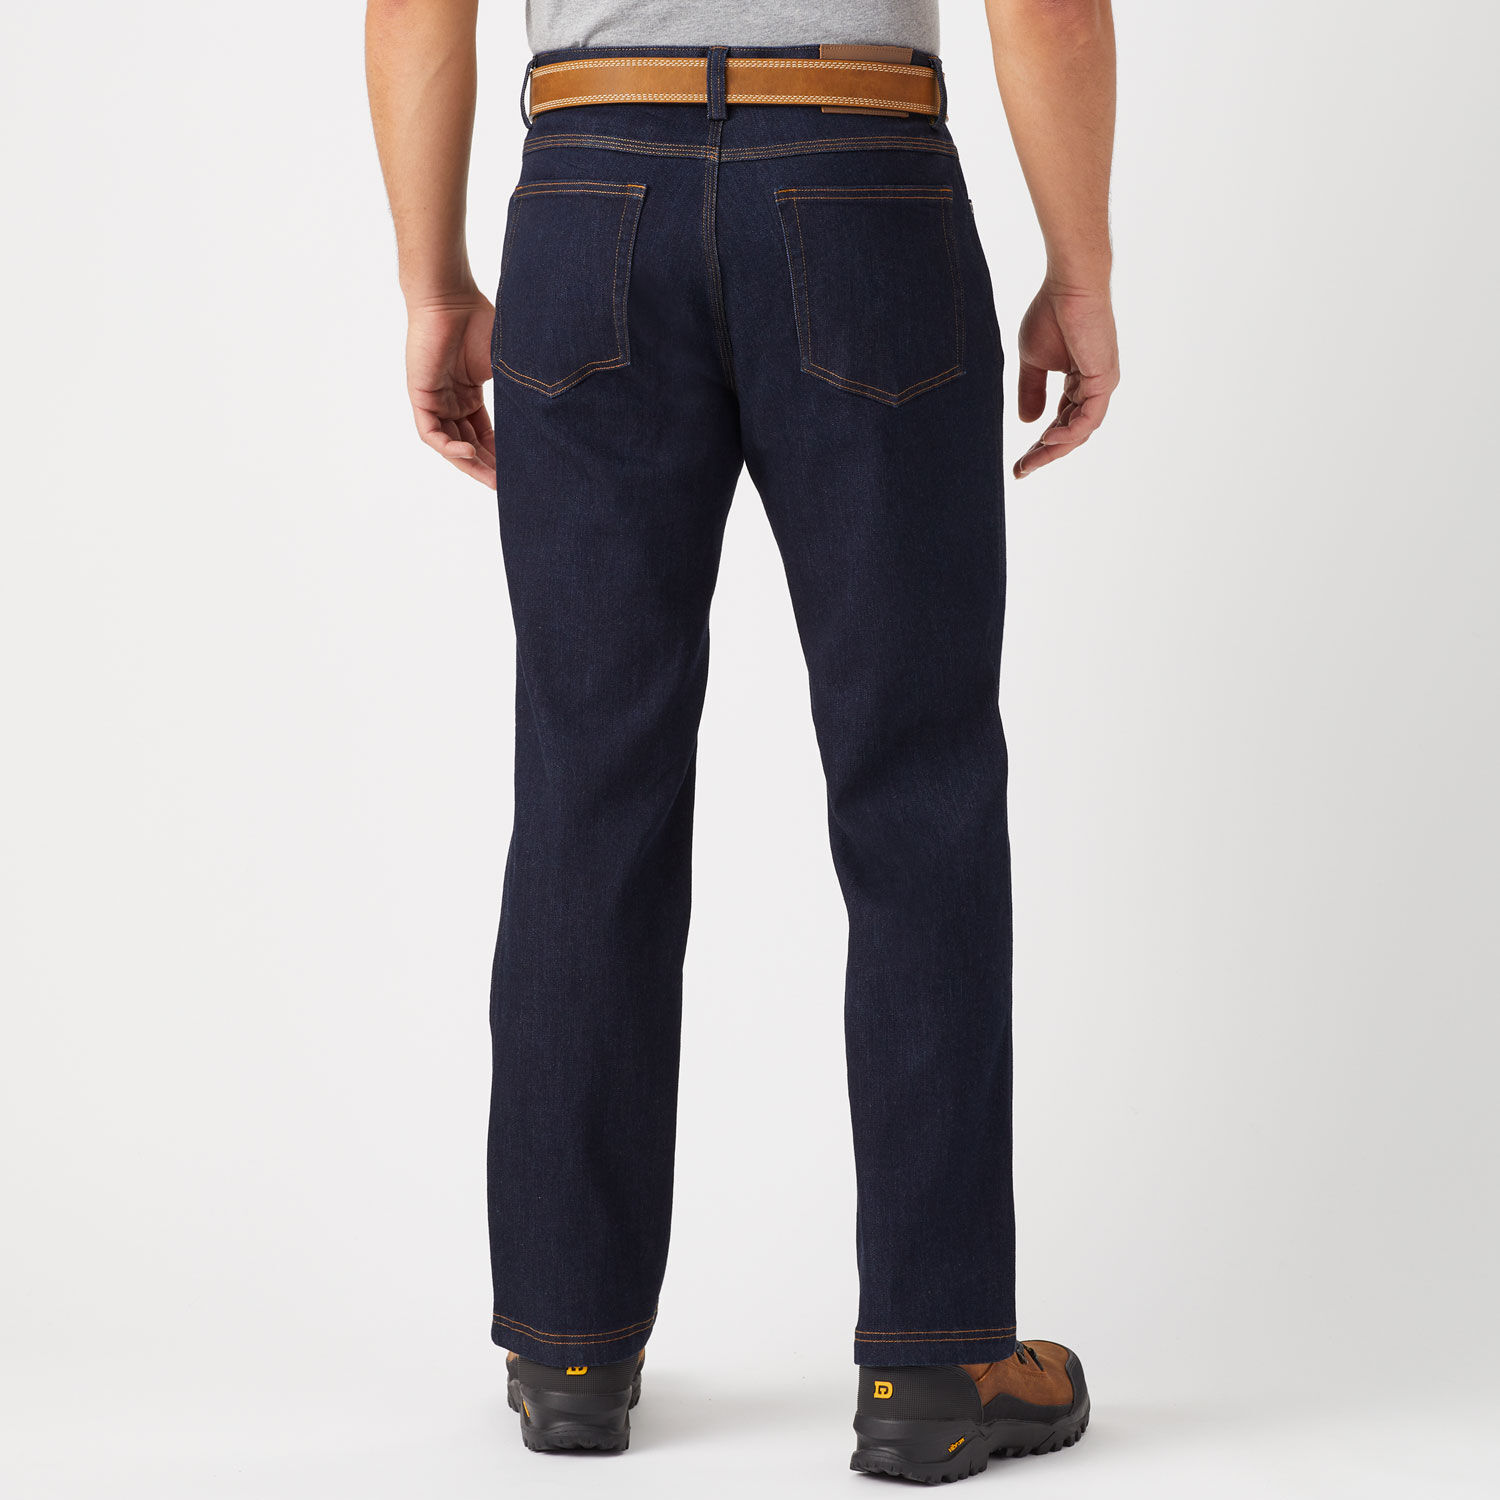 Full Blue Men's 5 Pocket Relaxed Fit Jeans - Sharpe's Department Stores